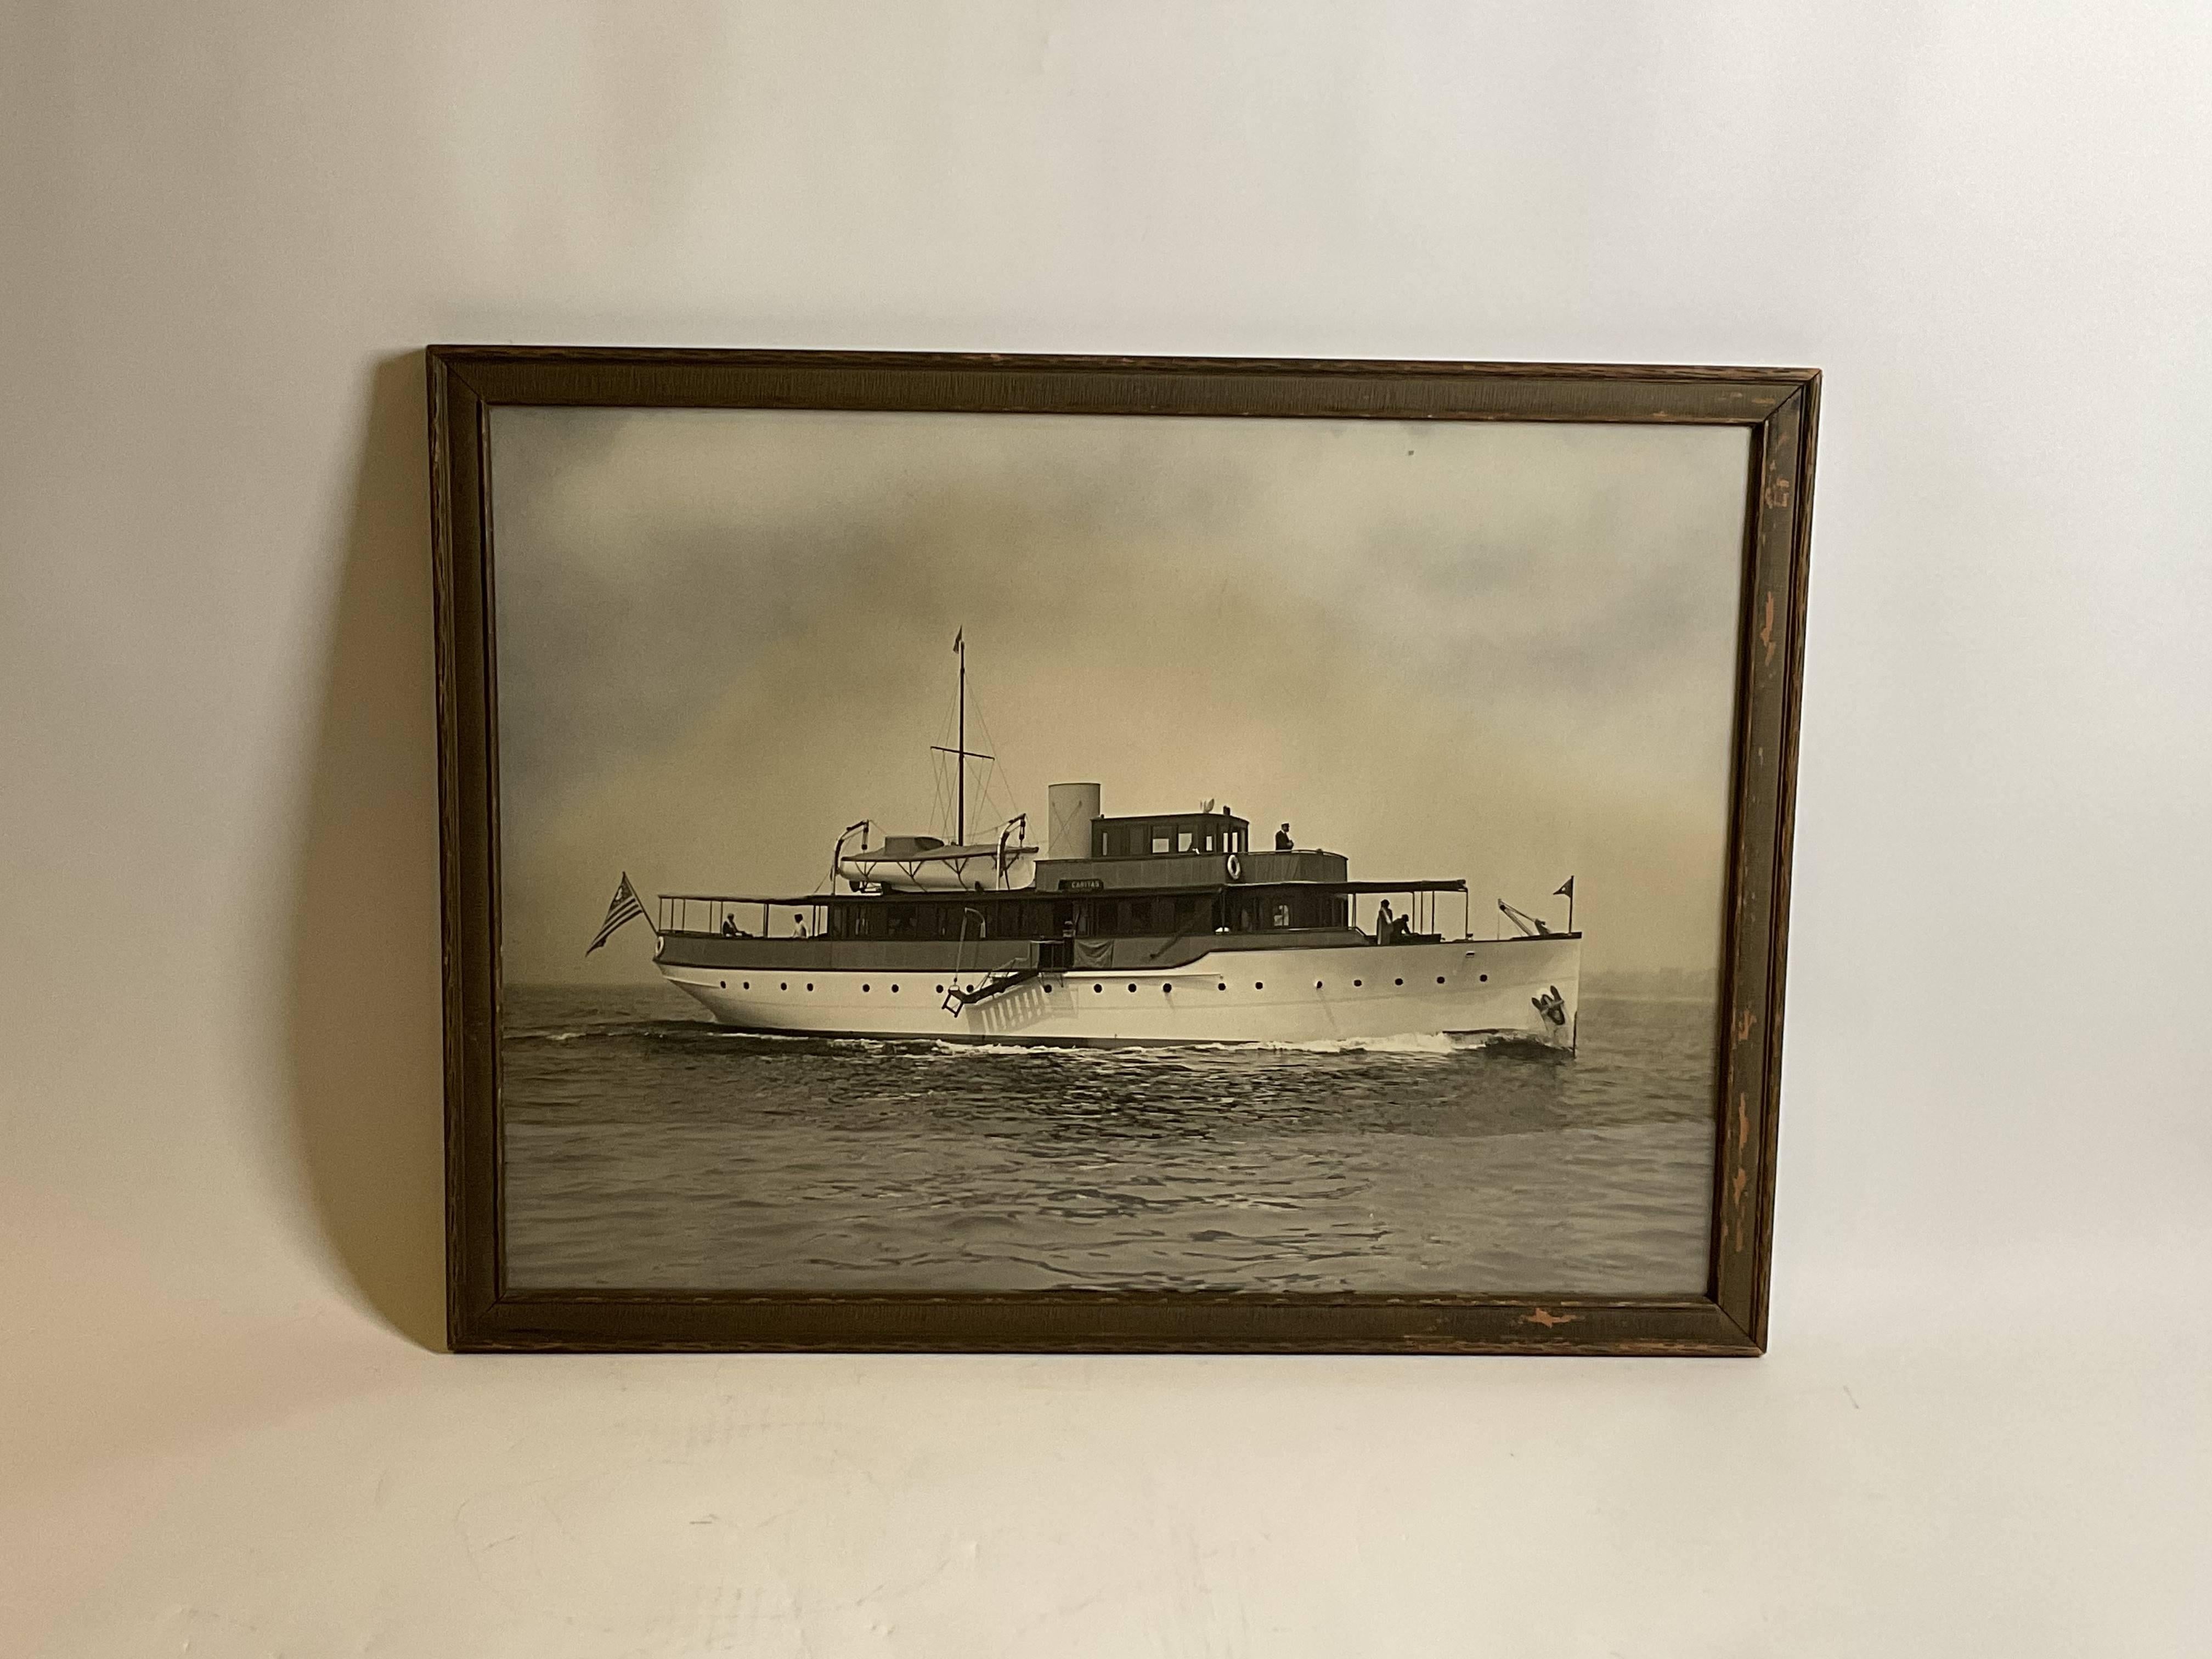 North American Photograph Of The Lawley Yacht Caritas For Sale